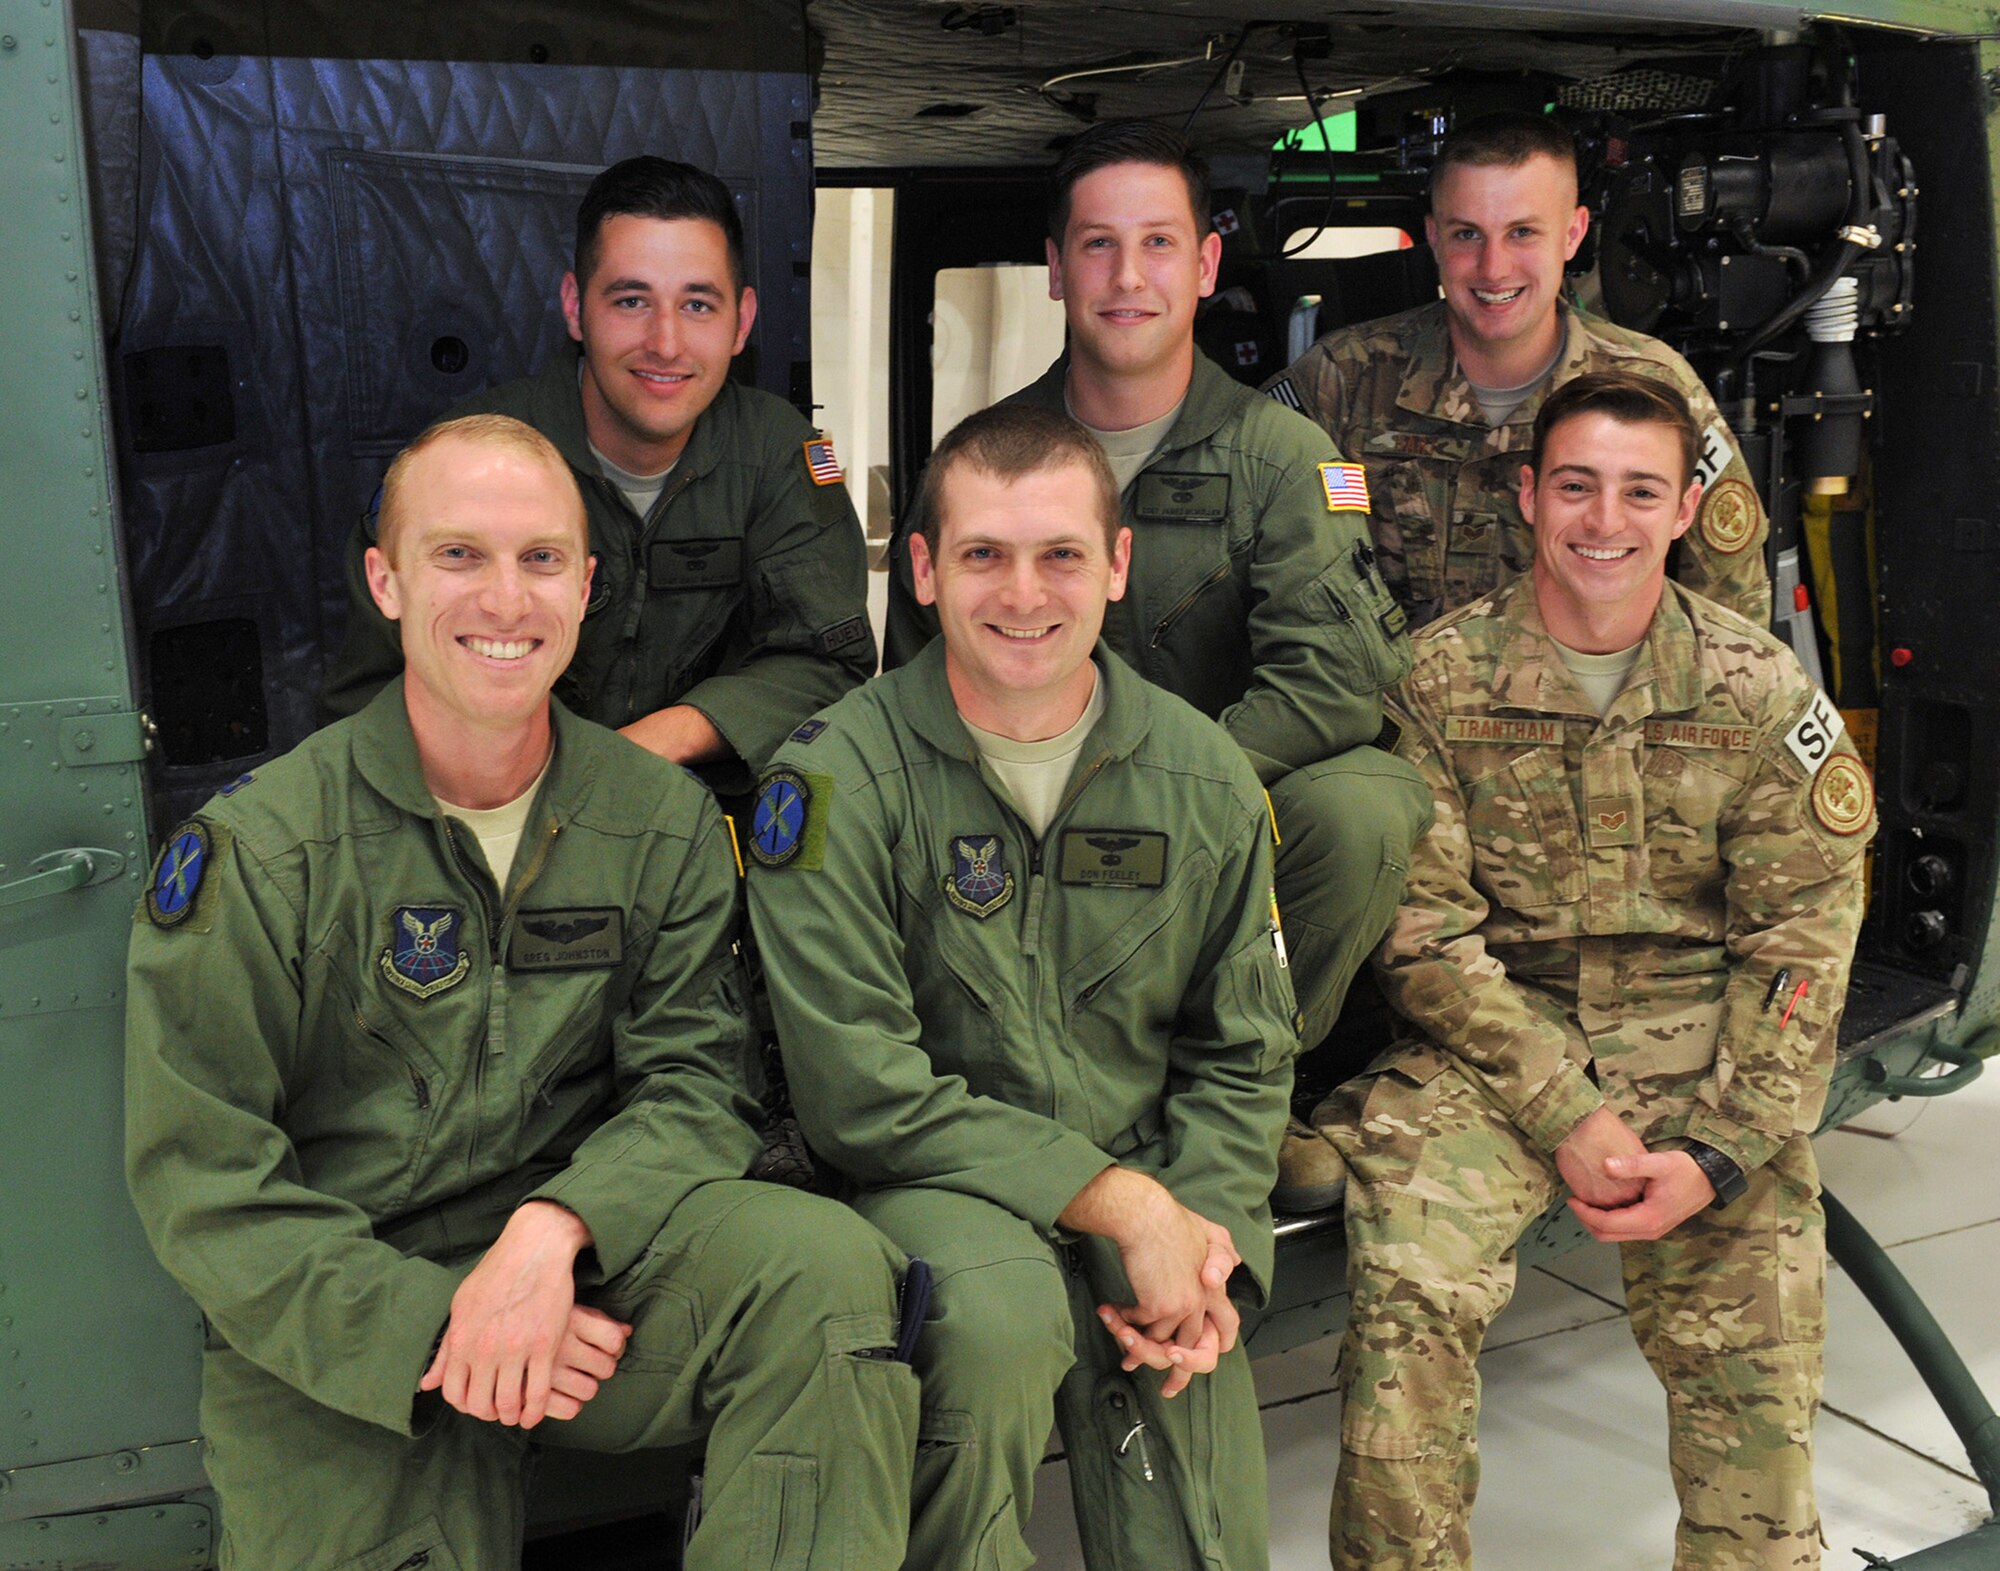 Members of Malmstrom Air Force Base’s Global Strike Challenge 2015 helicopter operations team pose on a UH-1N Iroquois helicopter Aug 3, 2015. In the front row, left to right are: Capt. Gregory Johnston, 40th Helicopter Squadron aircraft commander; Capt. Donald Feely, 40th HS co-pilot; and Staff Sgt. Steven Trantham, 741st Missile Security Forces Squadron tactical response force member. Rear row, left to right: Staff Sgt. Eric McElroy, 40th HS special missions aviator; Staff Sgt. James McMullen, 40th HS special missions aviator; and Staff Sgt. Kyle Hart, 741st MSFS tactical response force member. The team will compete in three events Aug. 9-11 at Camp Guernsey, Wyo. (U.S. Air Force photo/John Turner)